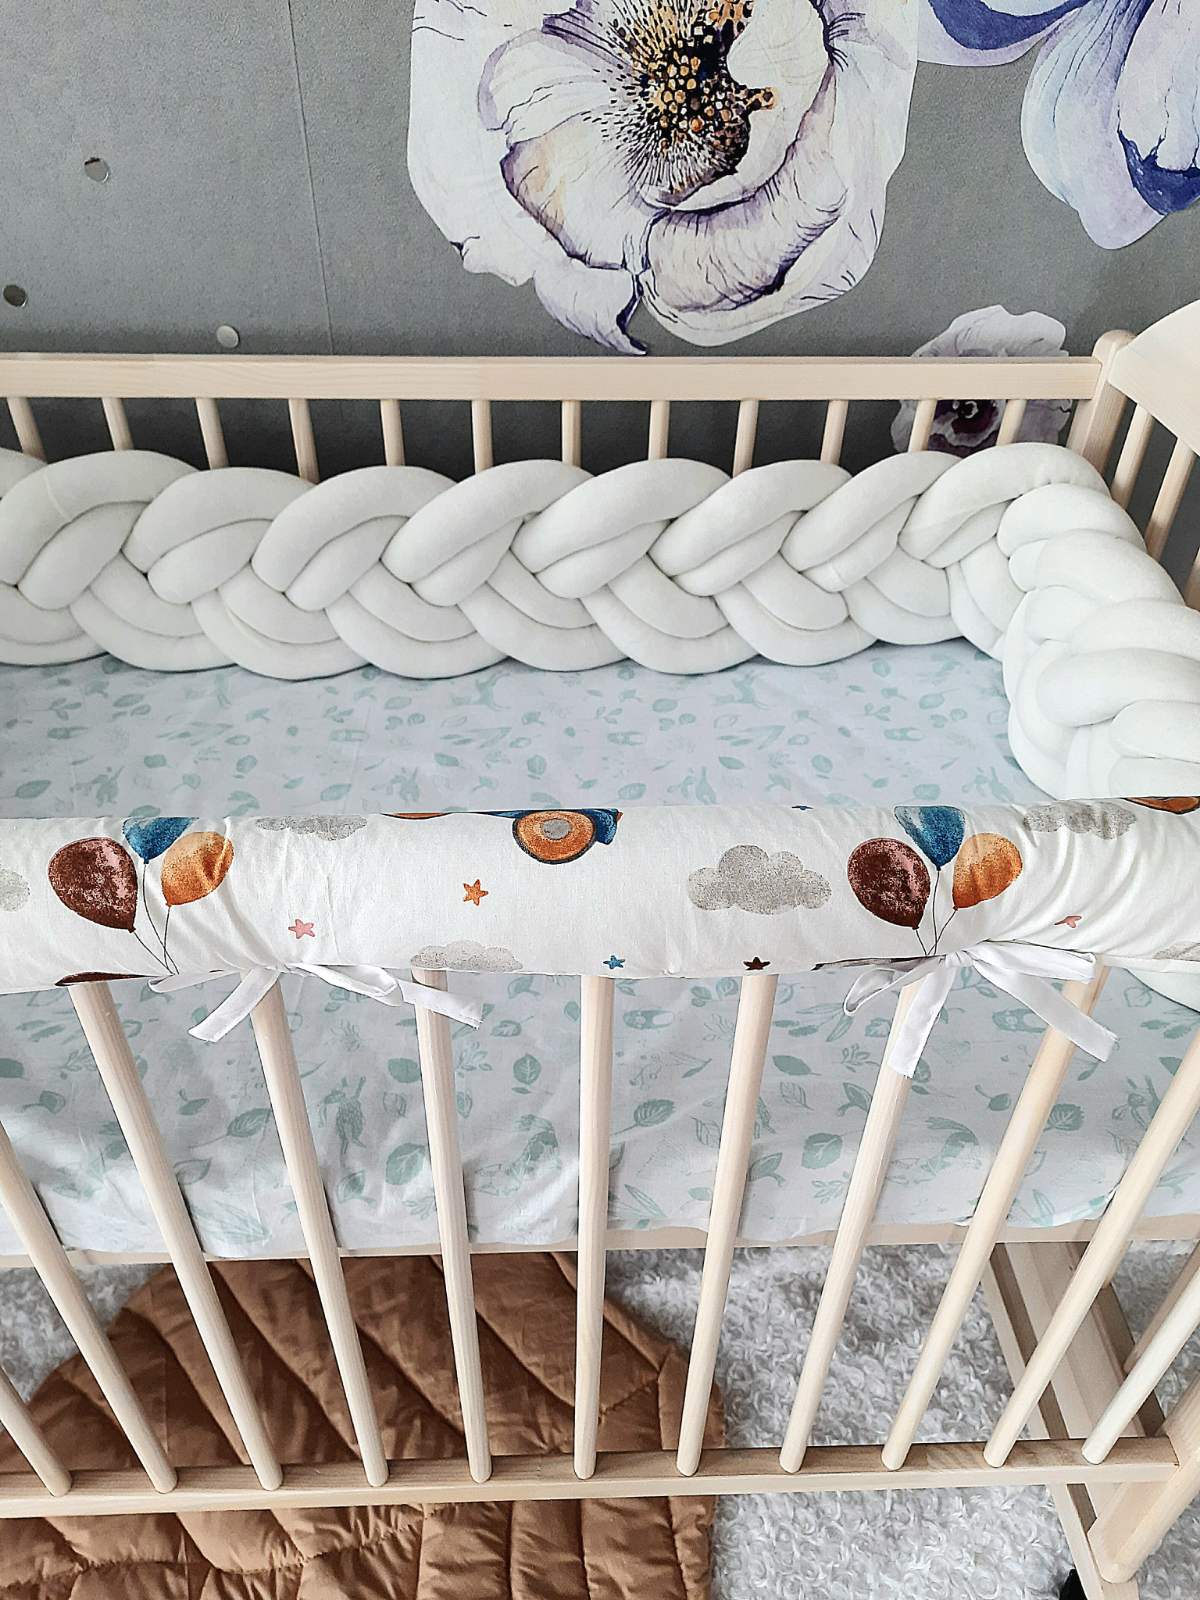 Cotton Rail Cover: Protect Your Baby's Crib in Style - Car print